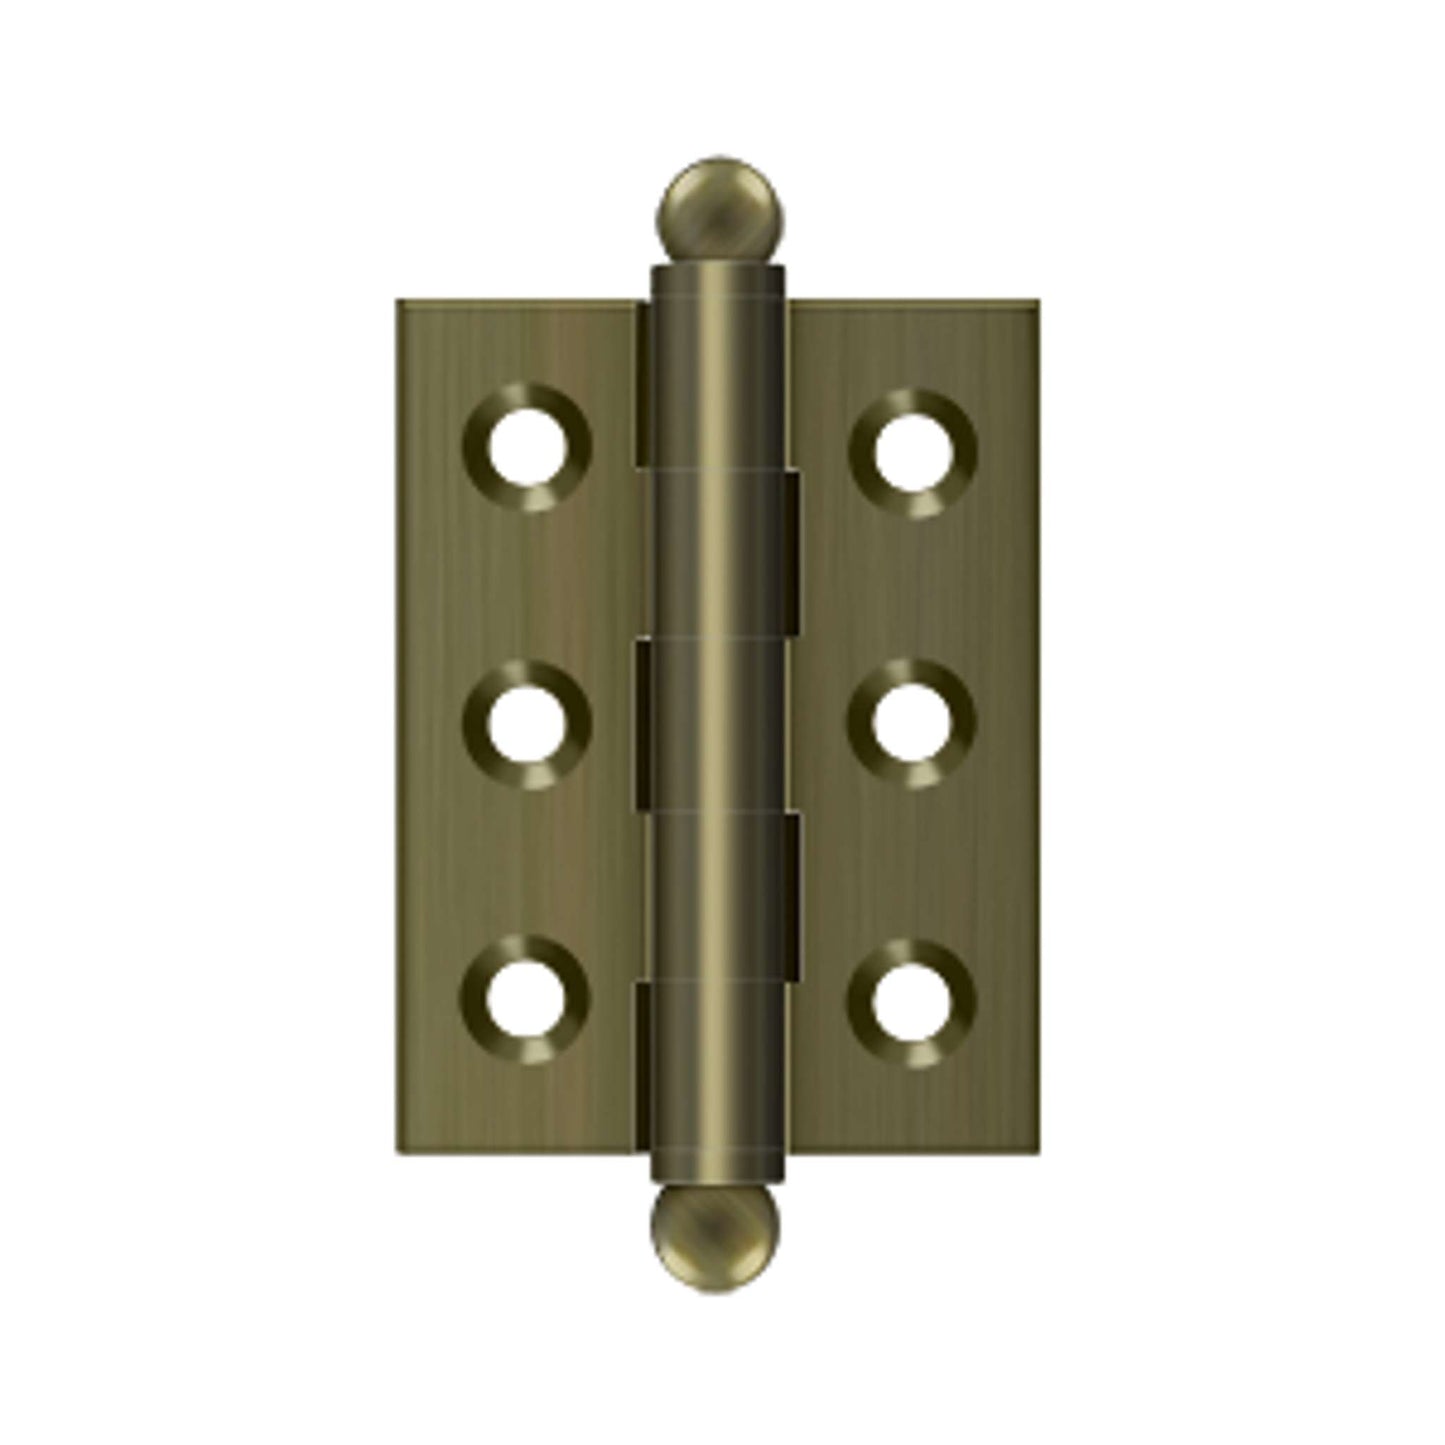 Deltana - 2" x 1-1/2" Hinge, w/ Ball Tips, Specialty Solid Brass